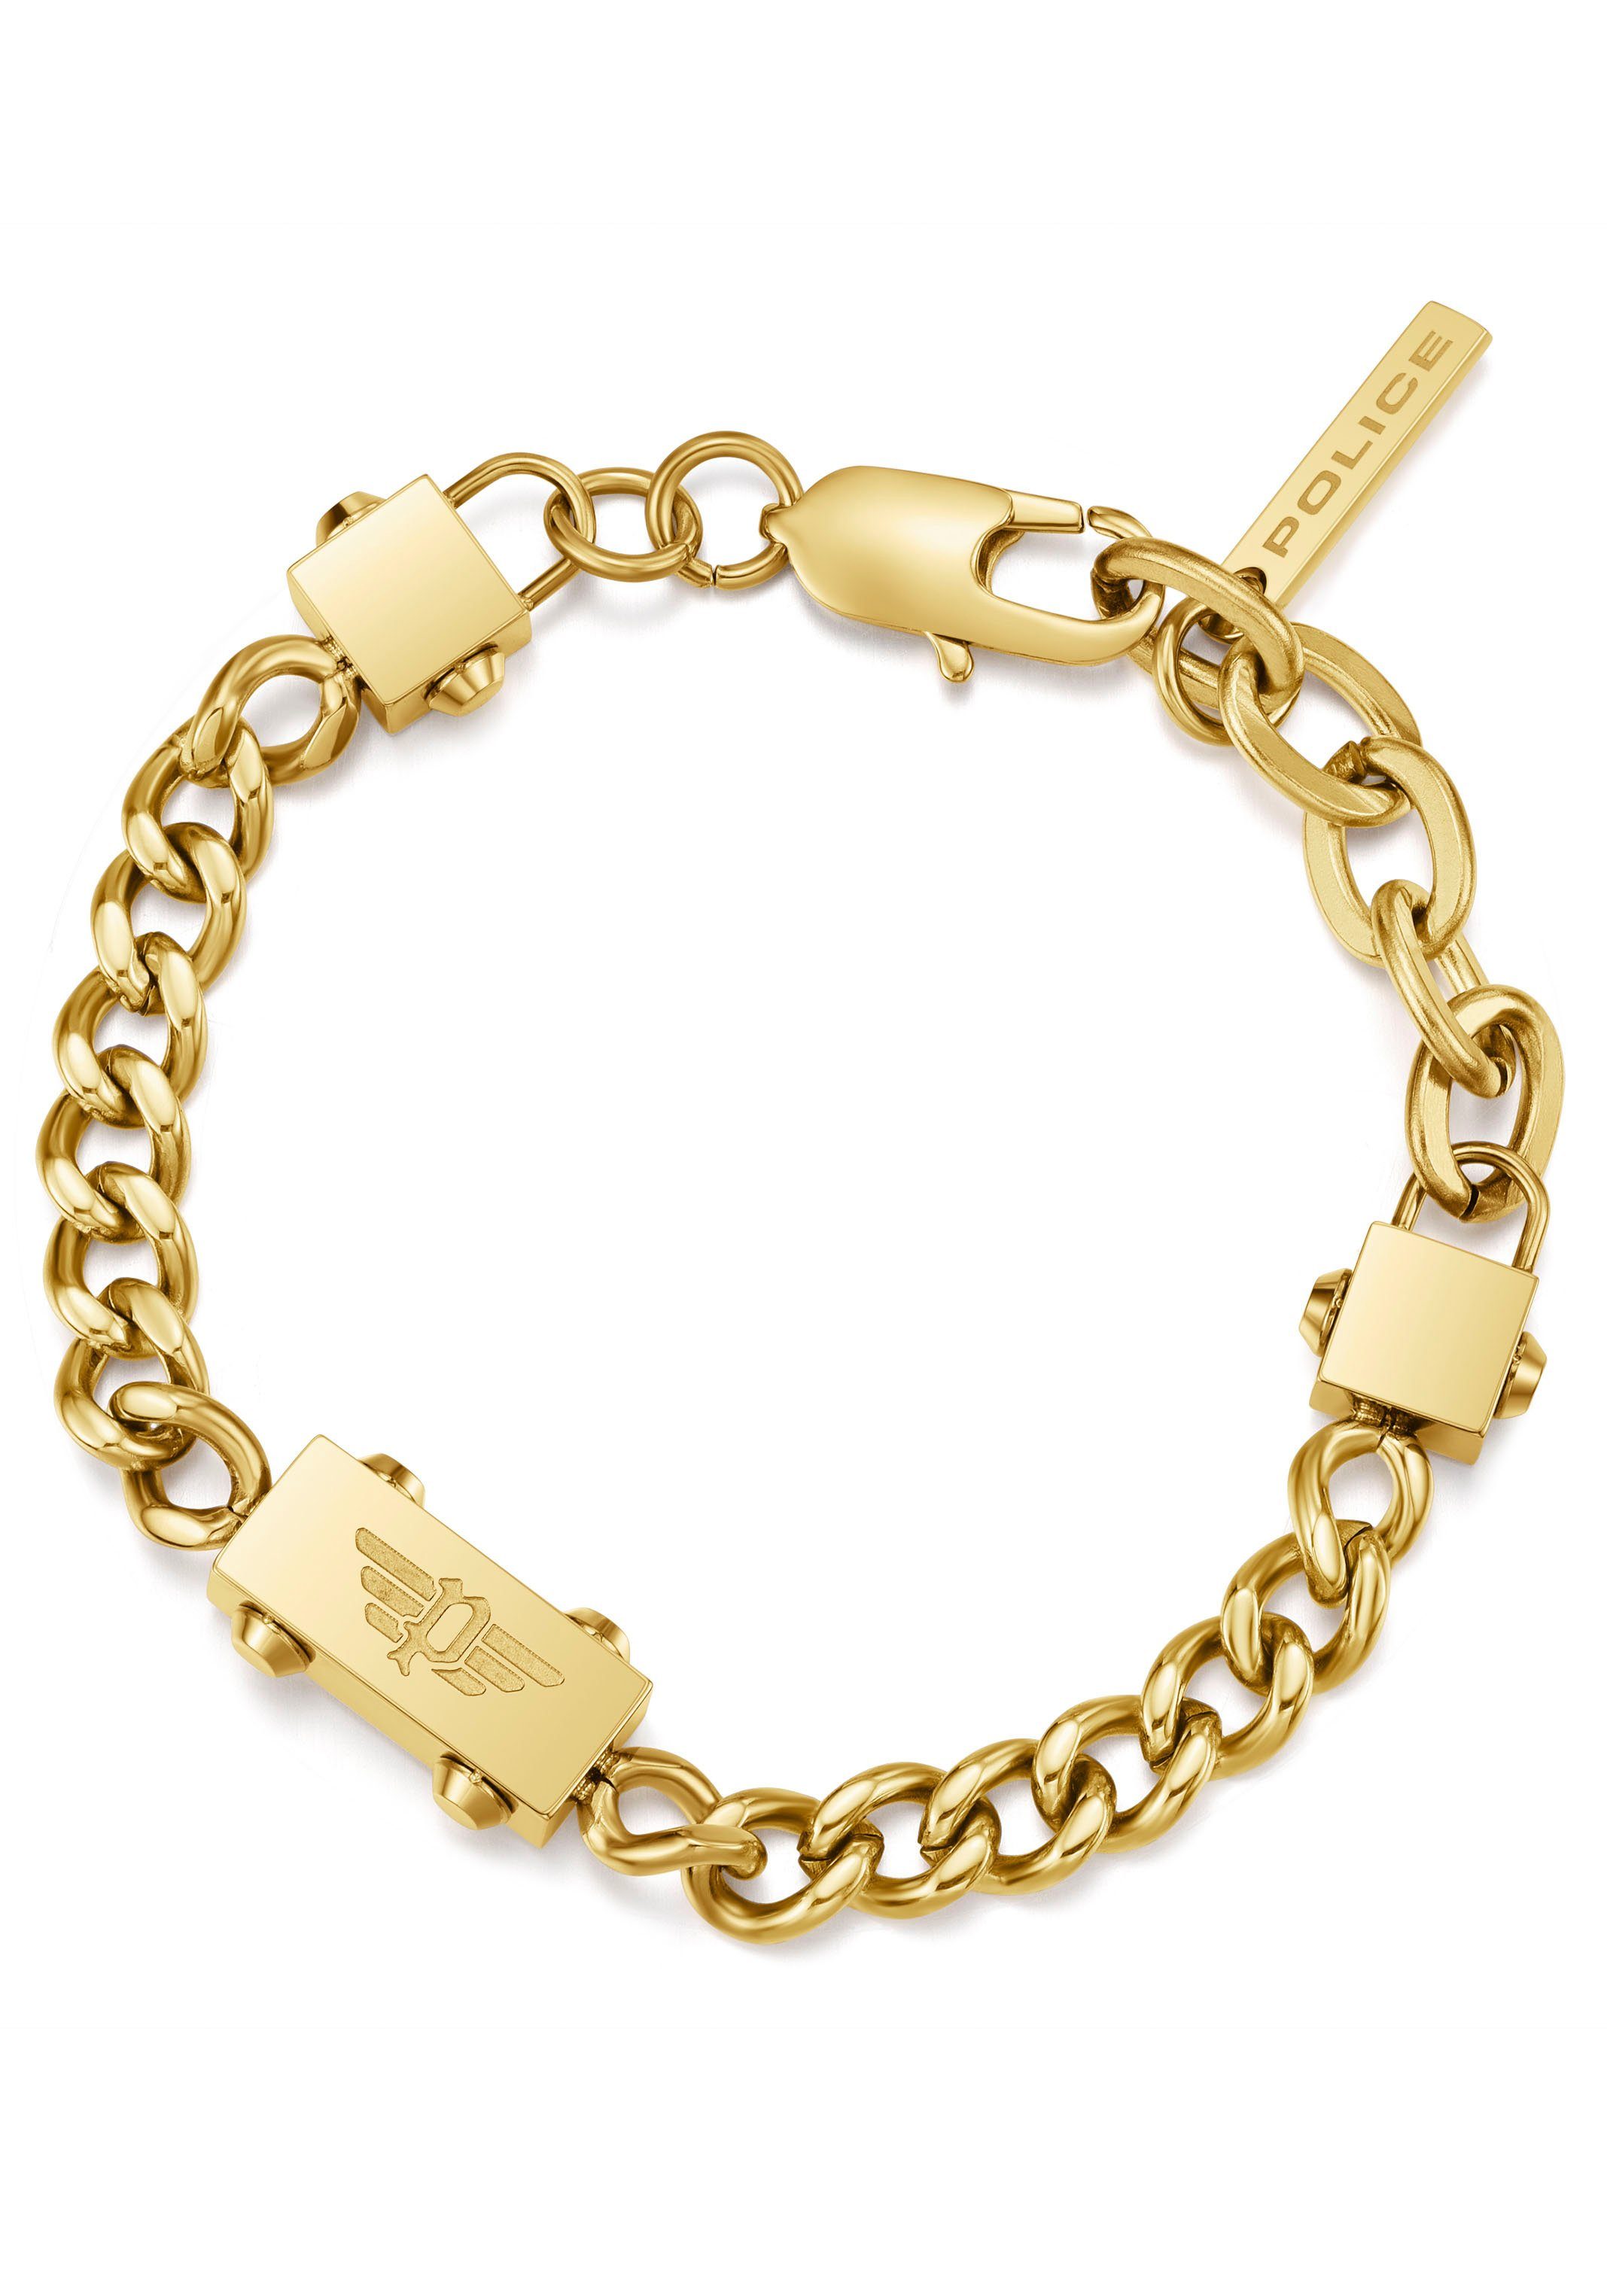 PEAGB0002102, gelbgoldfarben PEAGB0002106 CHAINED, Police Armband